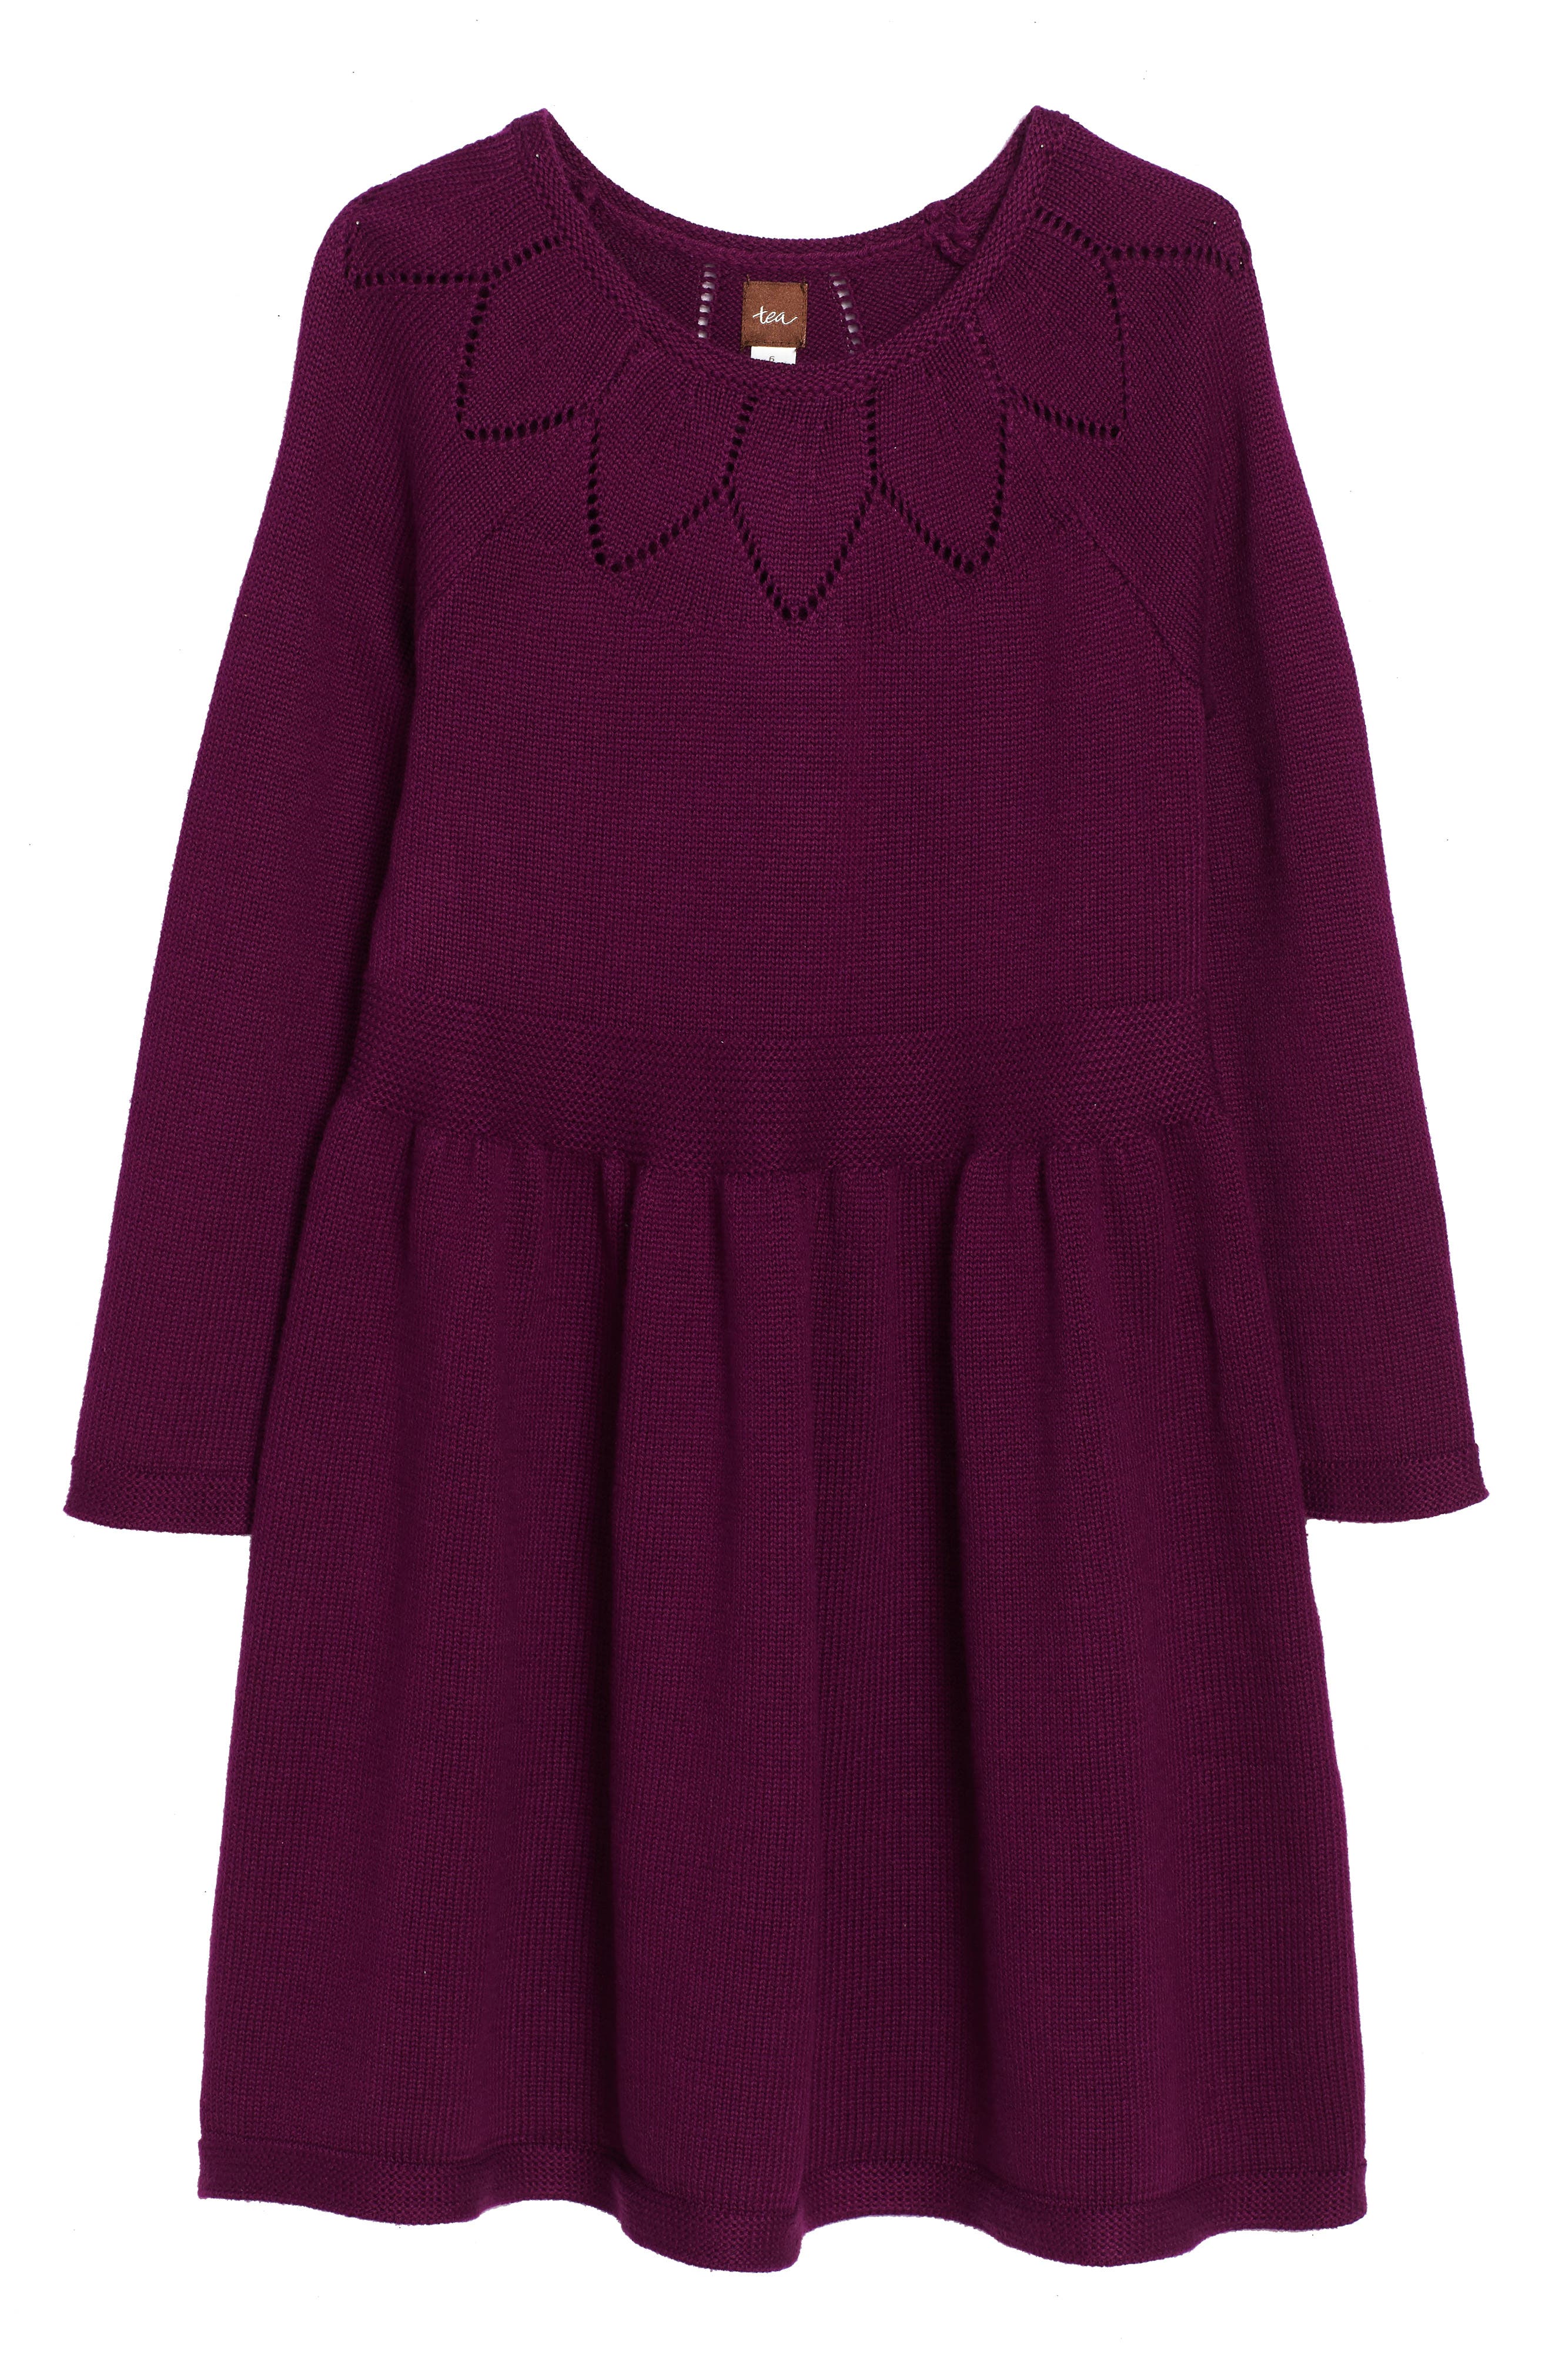 Girls' Purple Dresses & Rompers: Everyday & Special Occasion ...